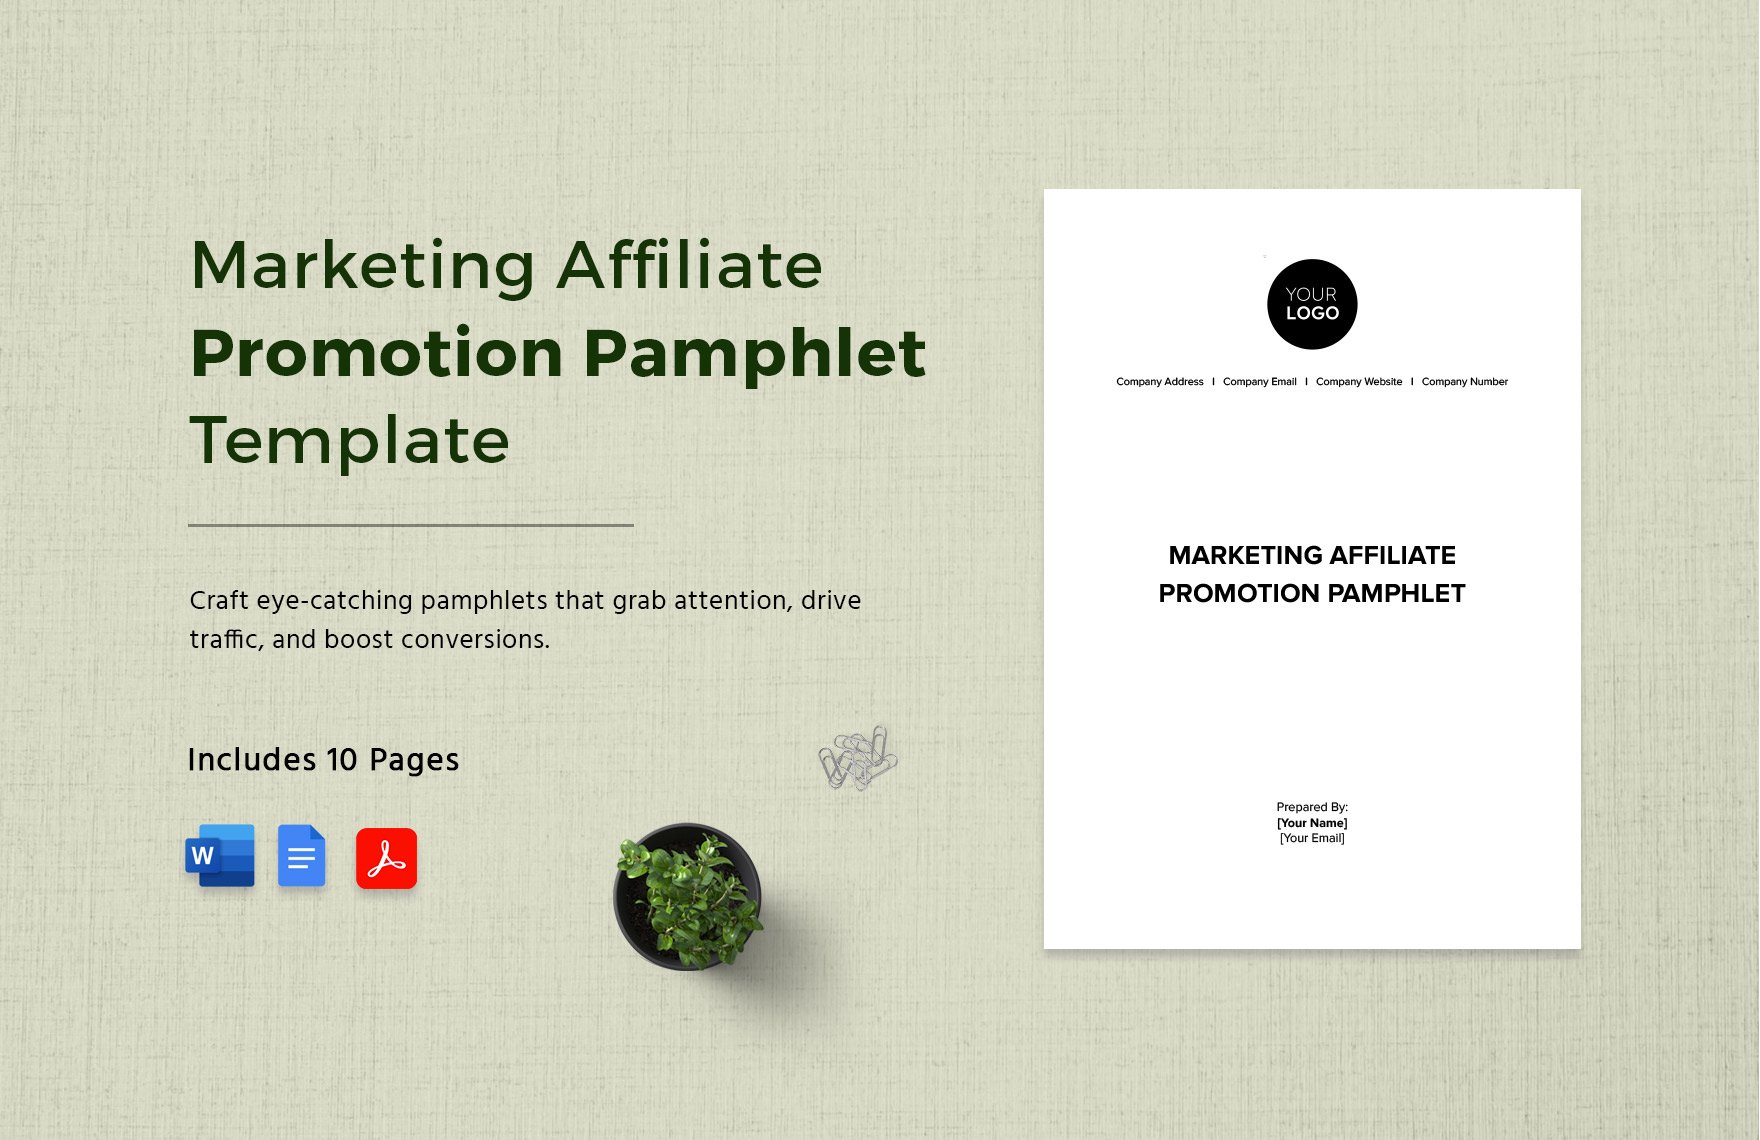 Marketing Affiliate Promotion Pamphlet Template in Word, Google Docs, PDF